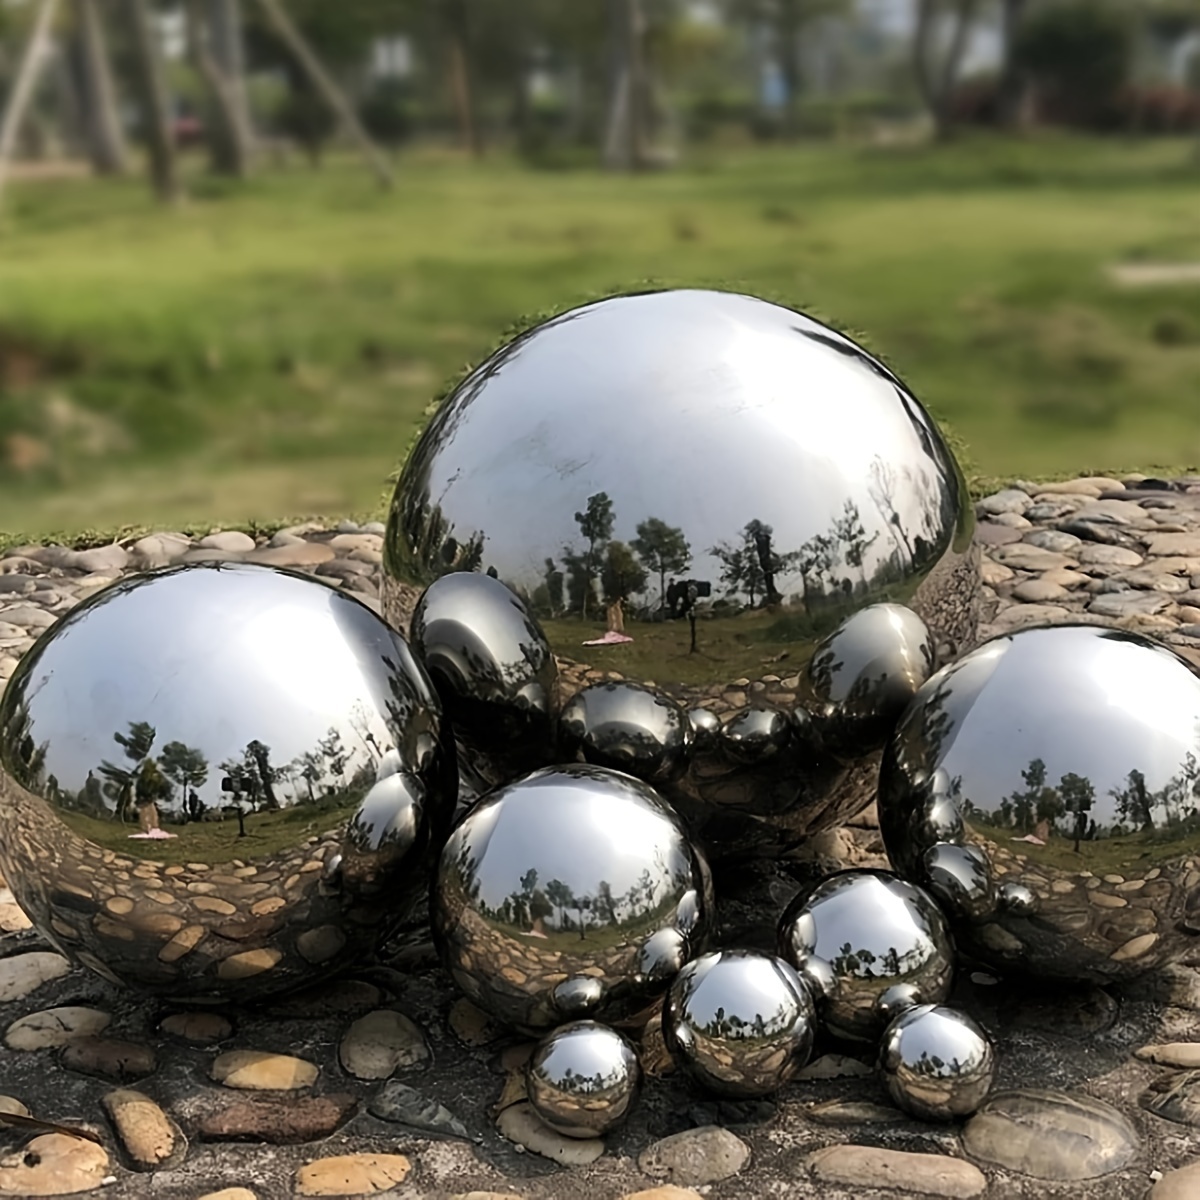 

Stainless Steel Garden Sphere - Reflective Mirror Finish, Durable Outdoor Decor Ball For Patio & Lawn, Perfect For Independence Day & Housewarming Gifts